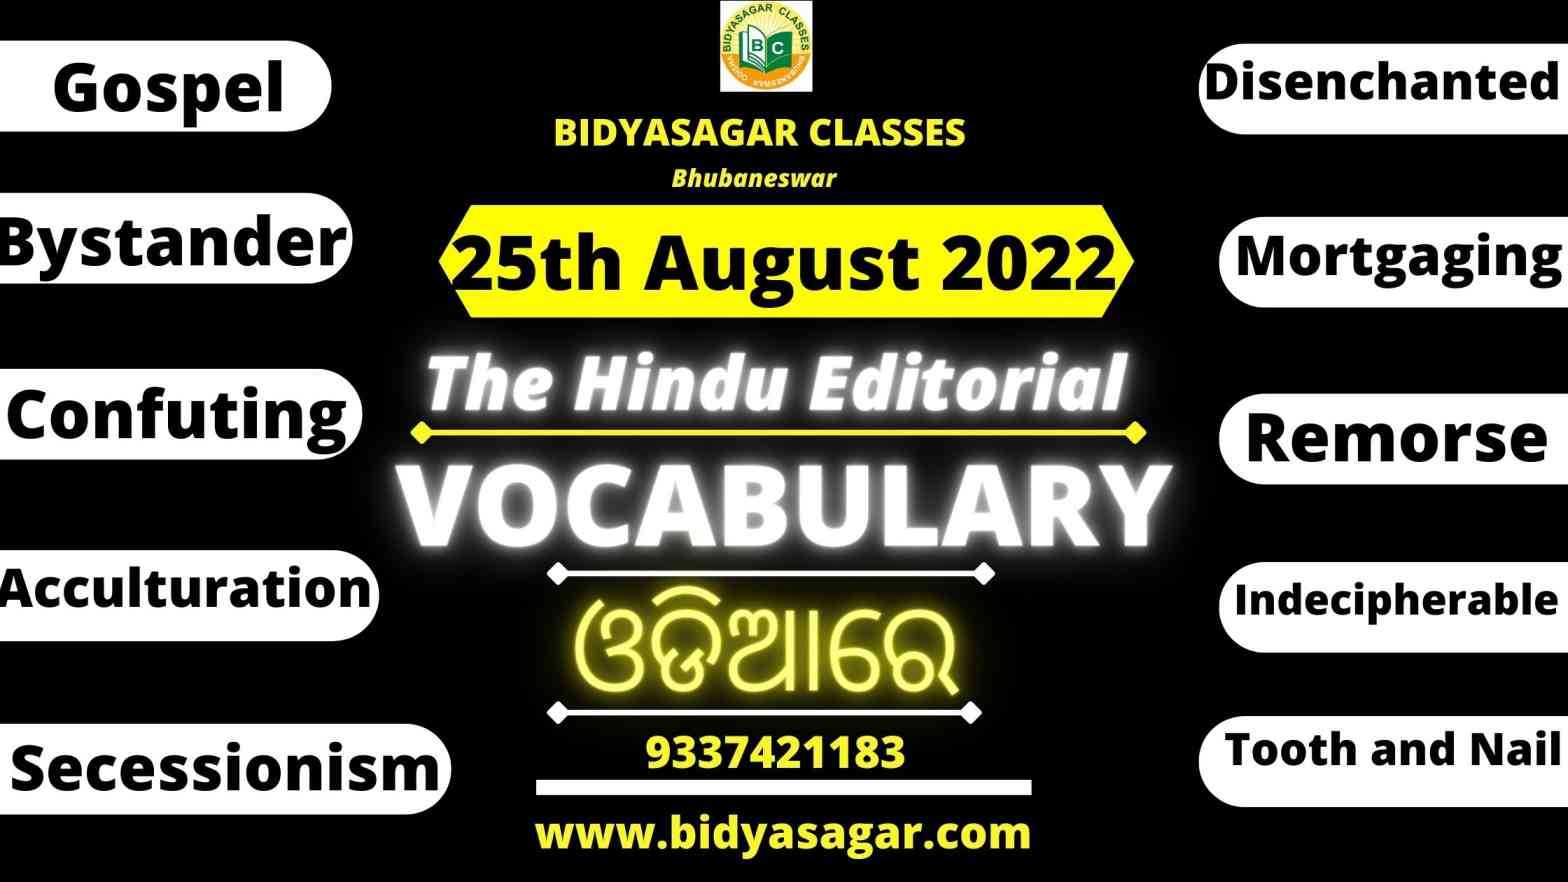 The Hindu Editorial Vocabulary of 25th August 2022